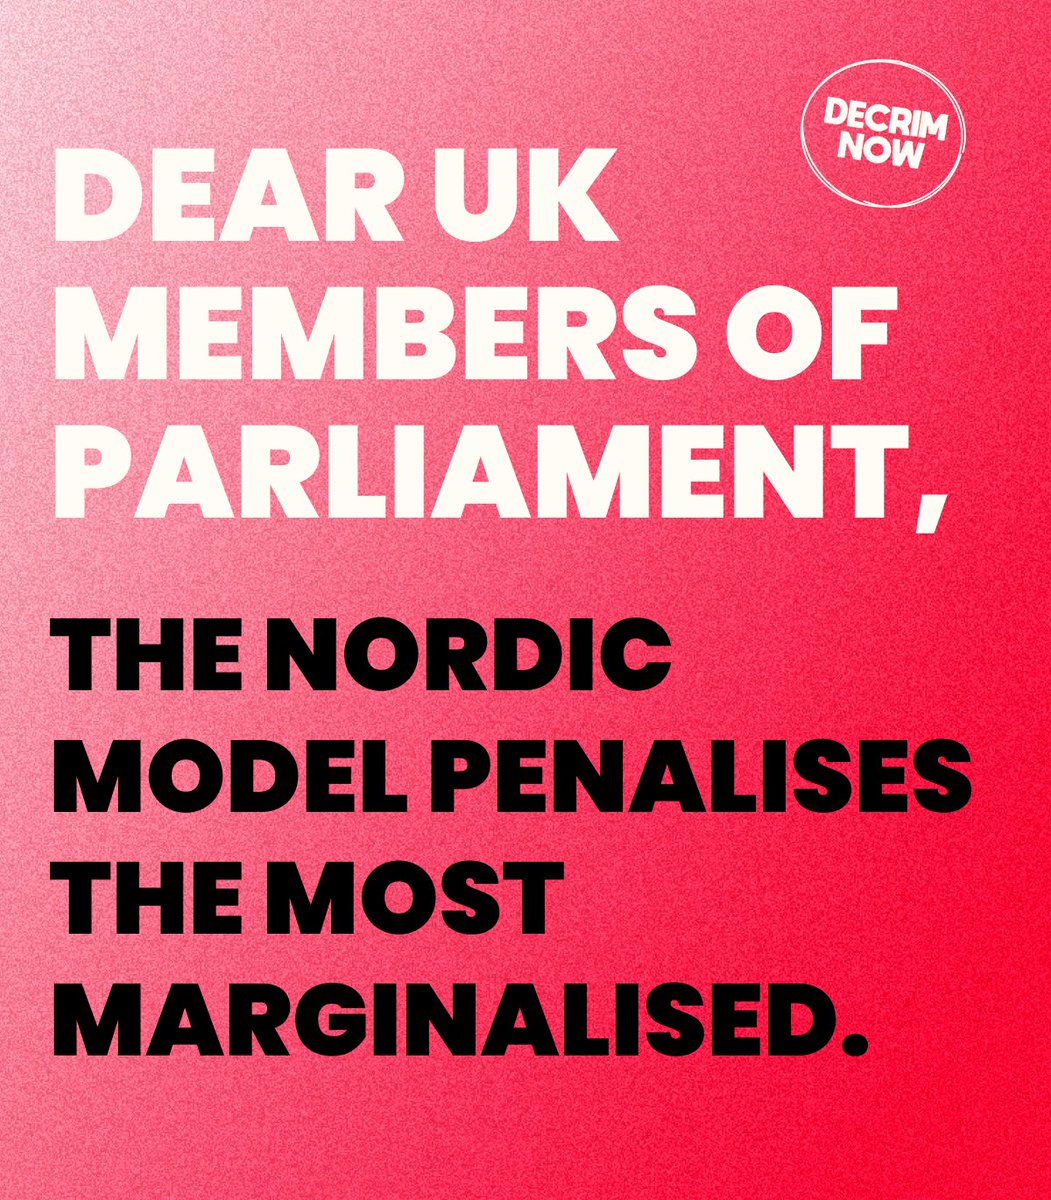  @All4Choice signed our open letter against the Nordic Model Alliance For Choice campaign for free safe legal abortion in Ireland North & South. Read the letter here  https://decrimnow.org.uk/open-letter-on-the-nordic-model/  #notonordicmodel